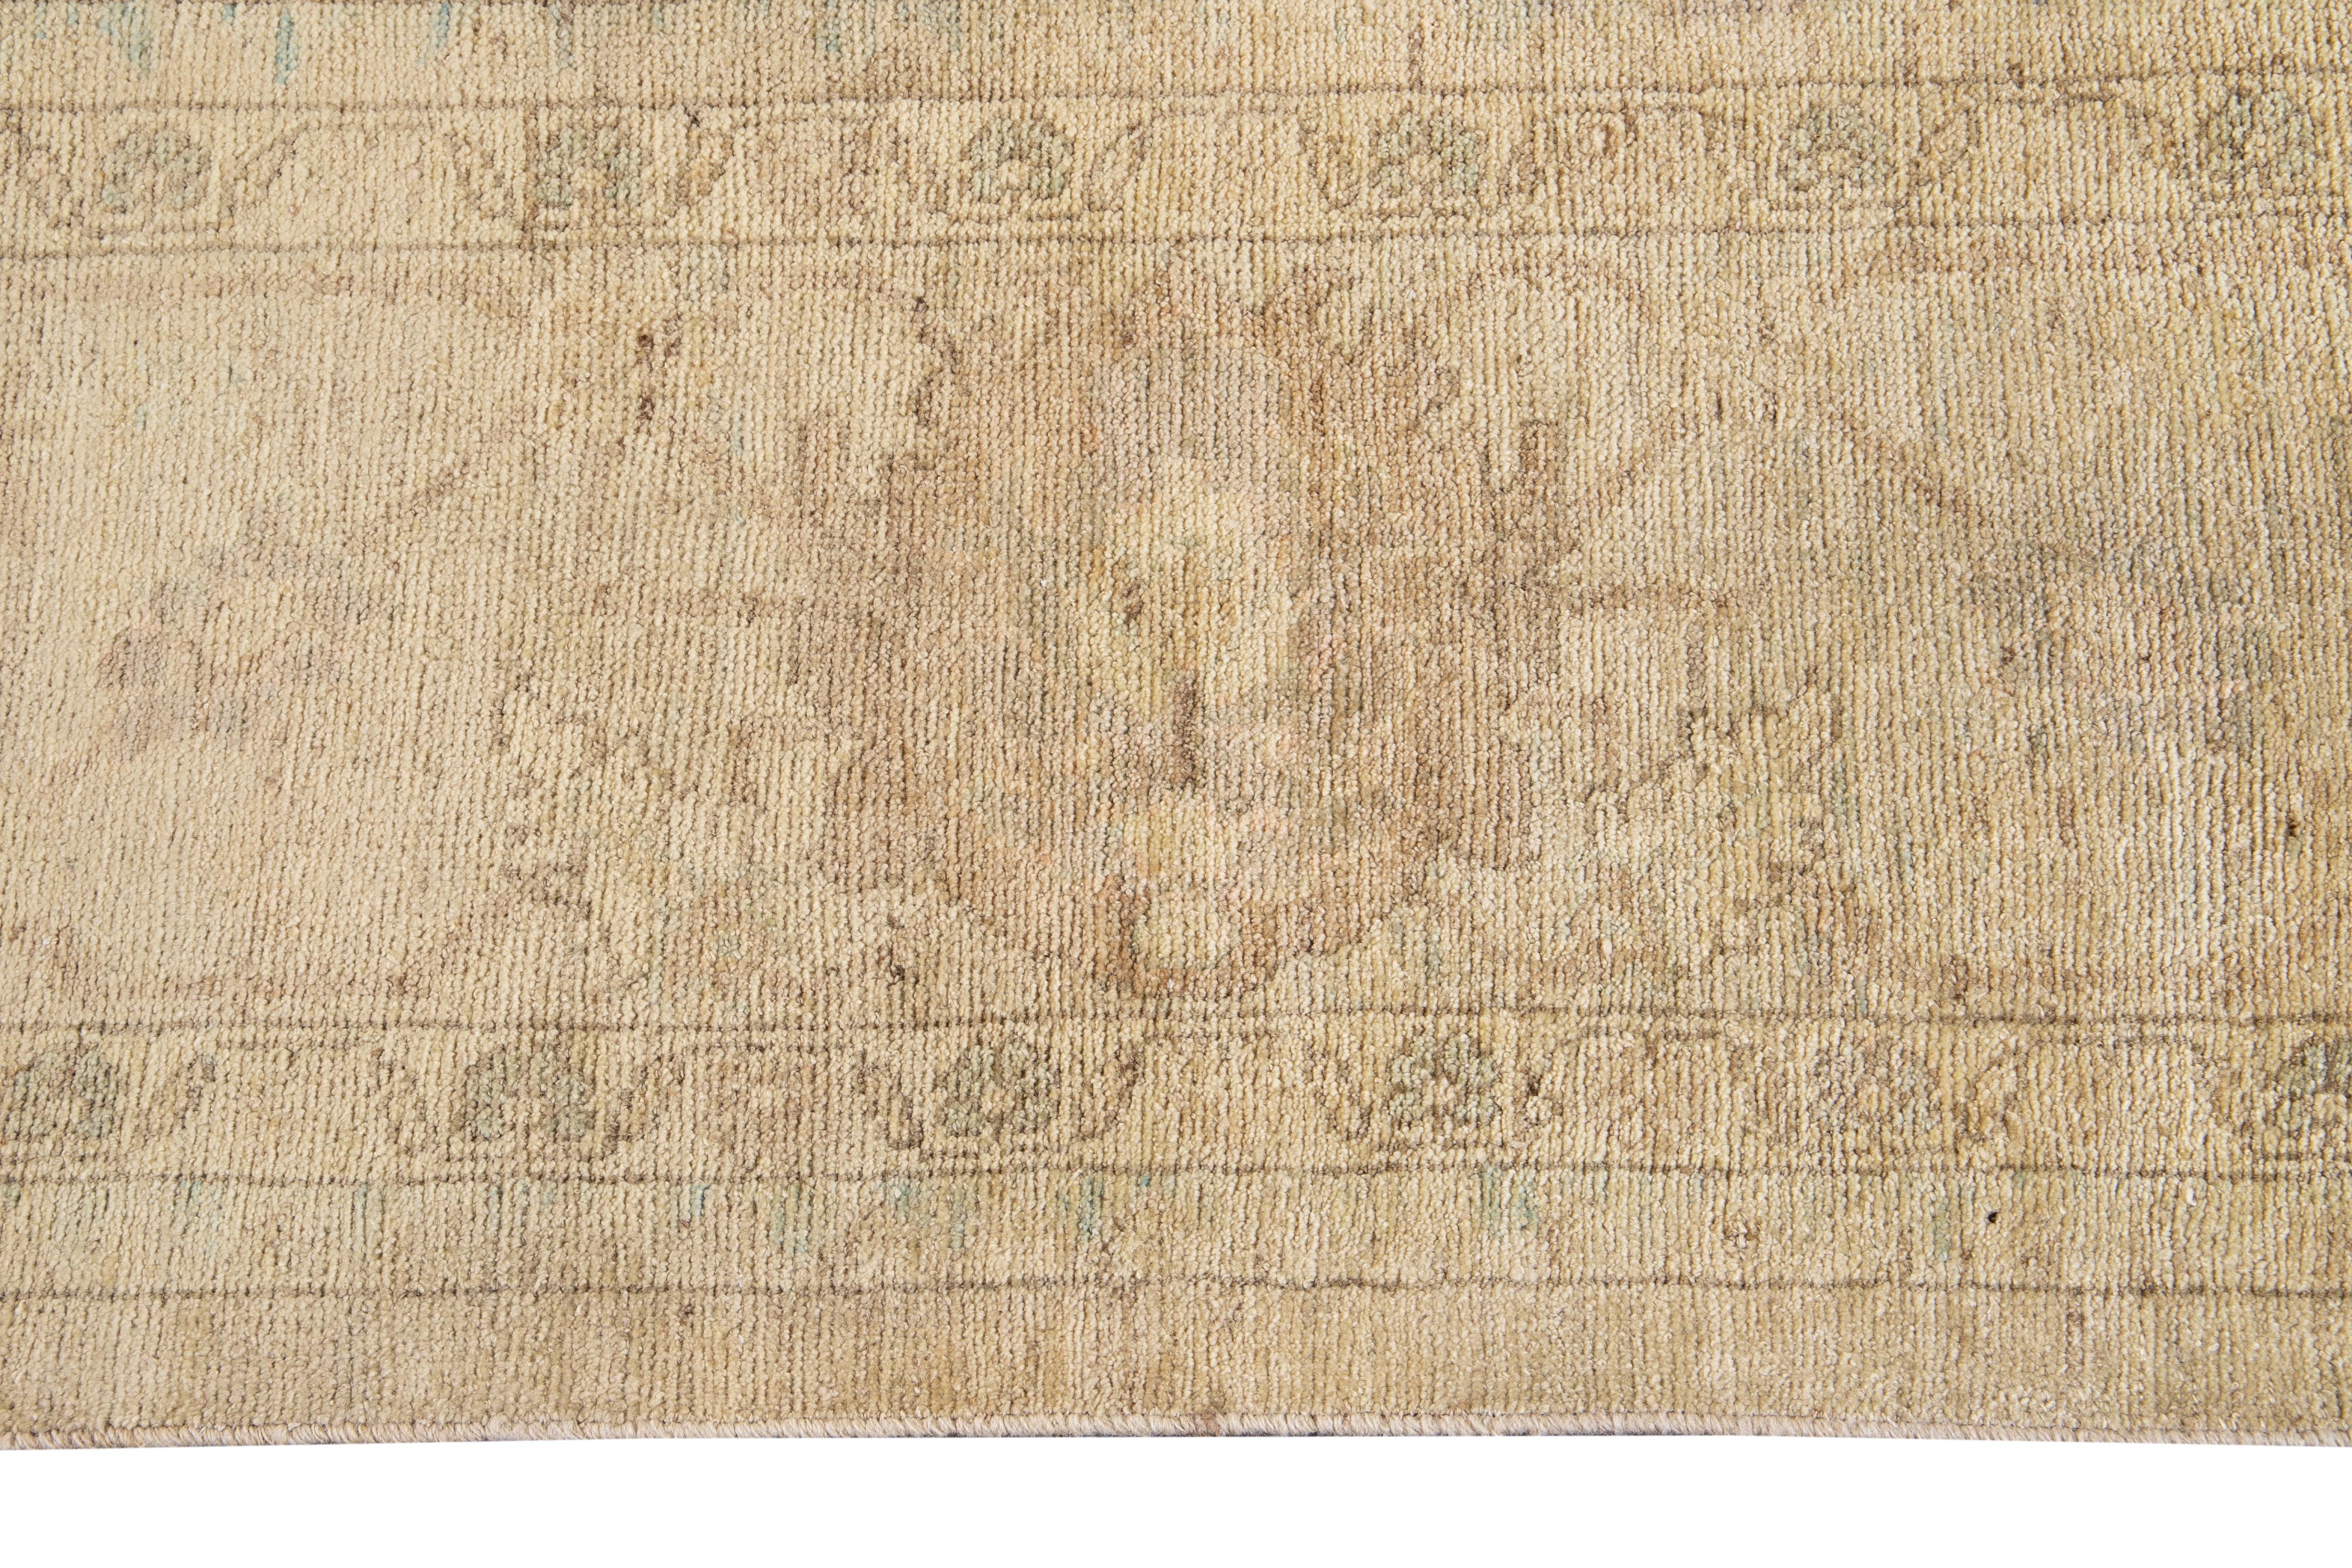 Wool 21st Century Modern Sultanabad Rug For Sale